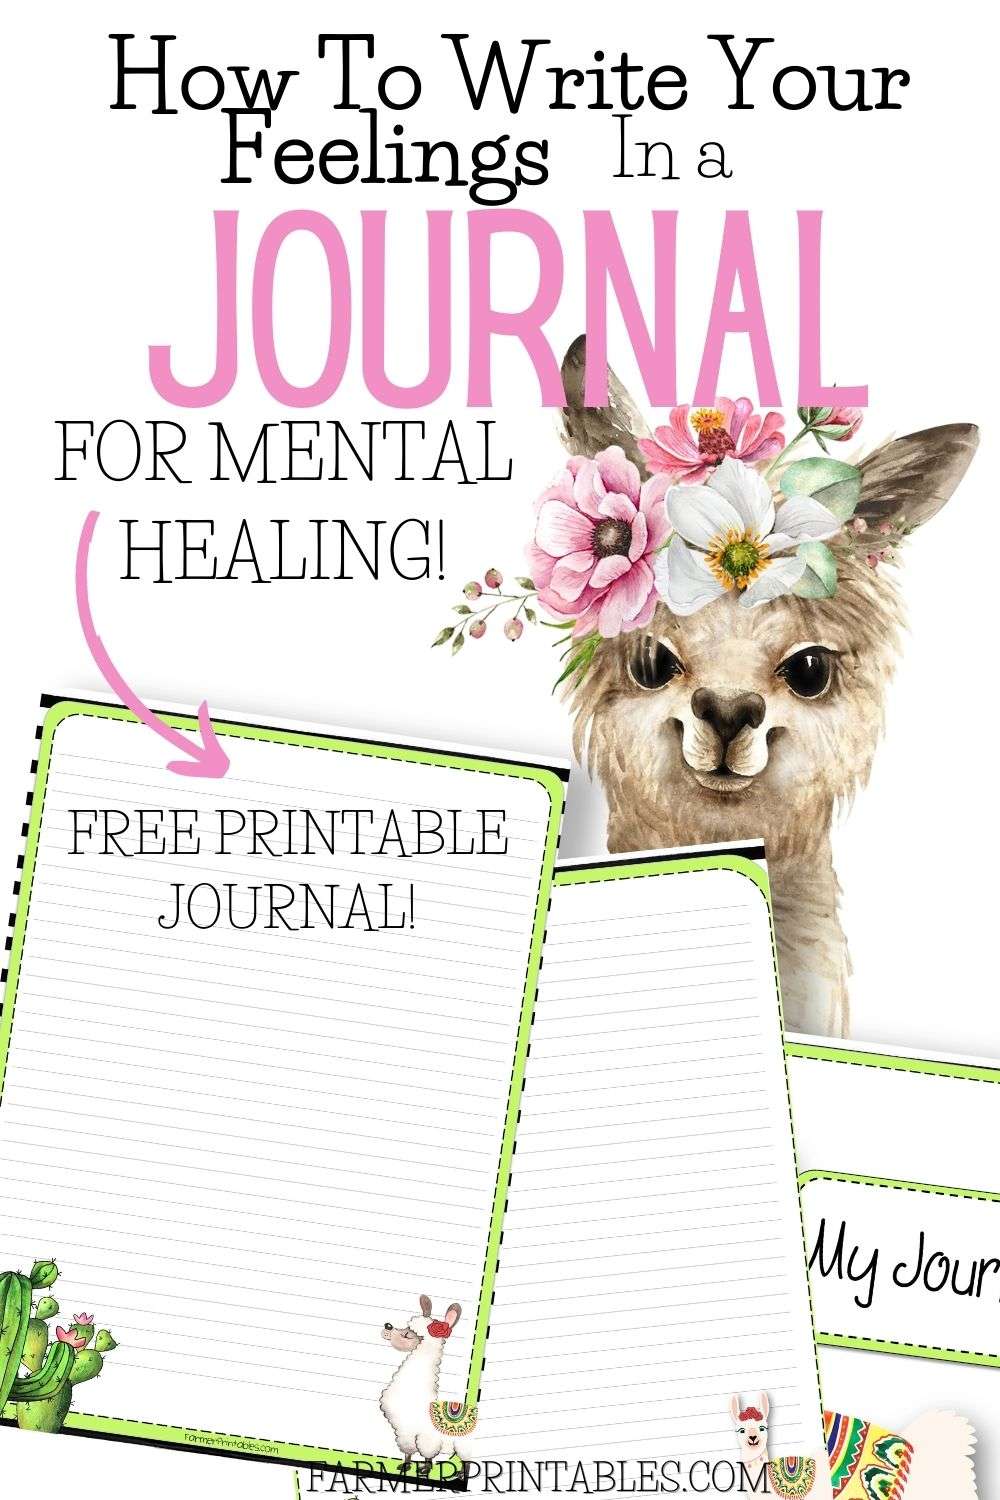 How To Write Your Feelings In A Journal For Mental Healing